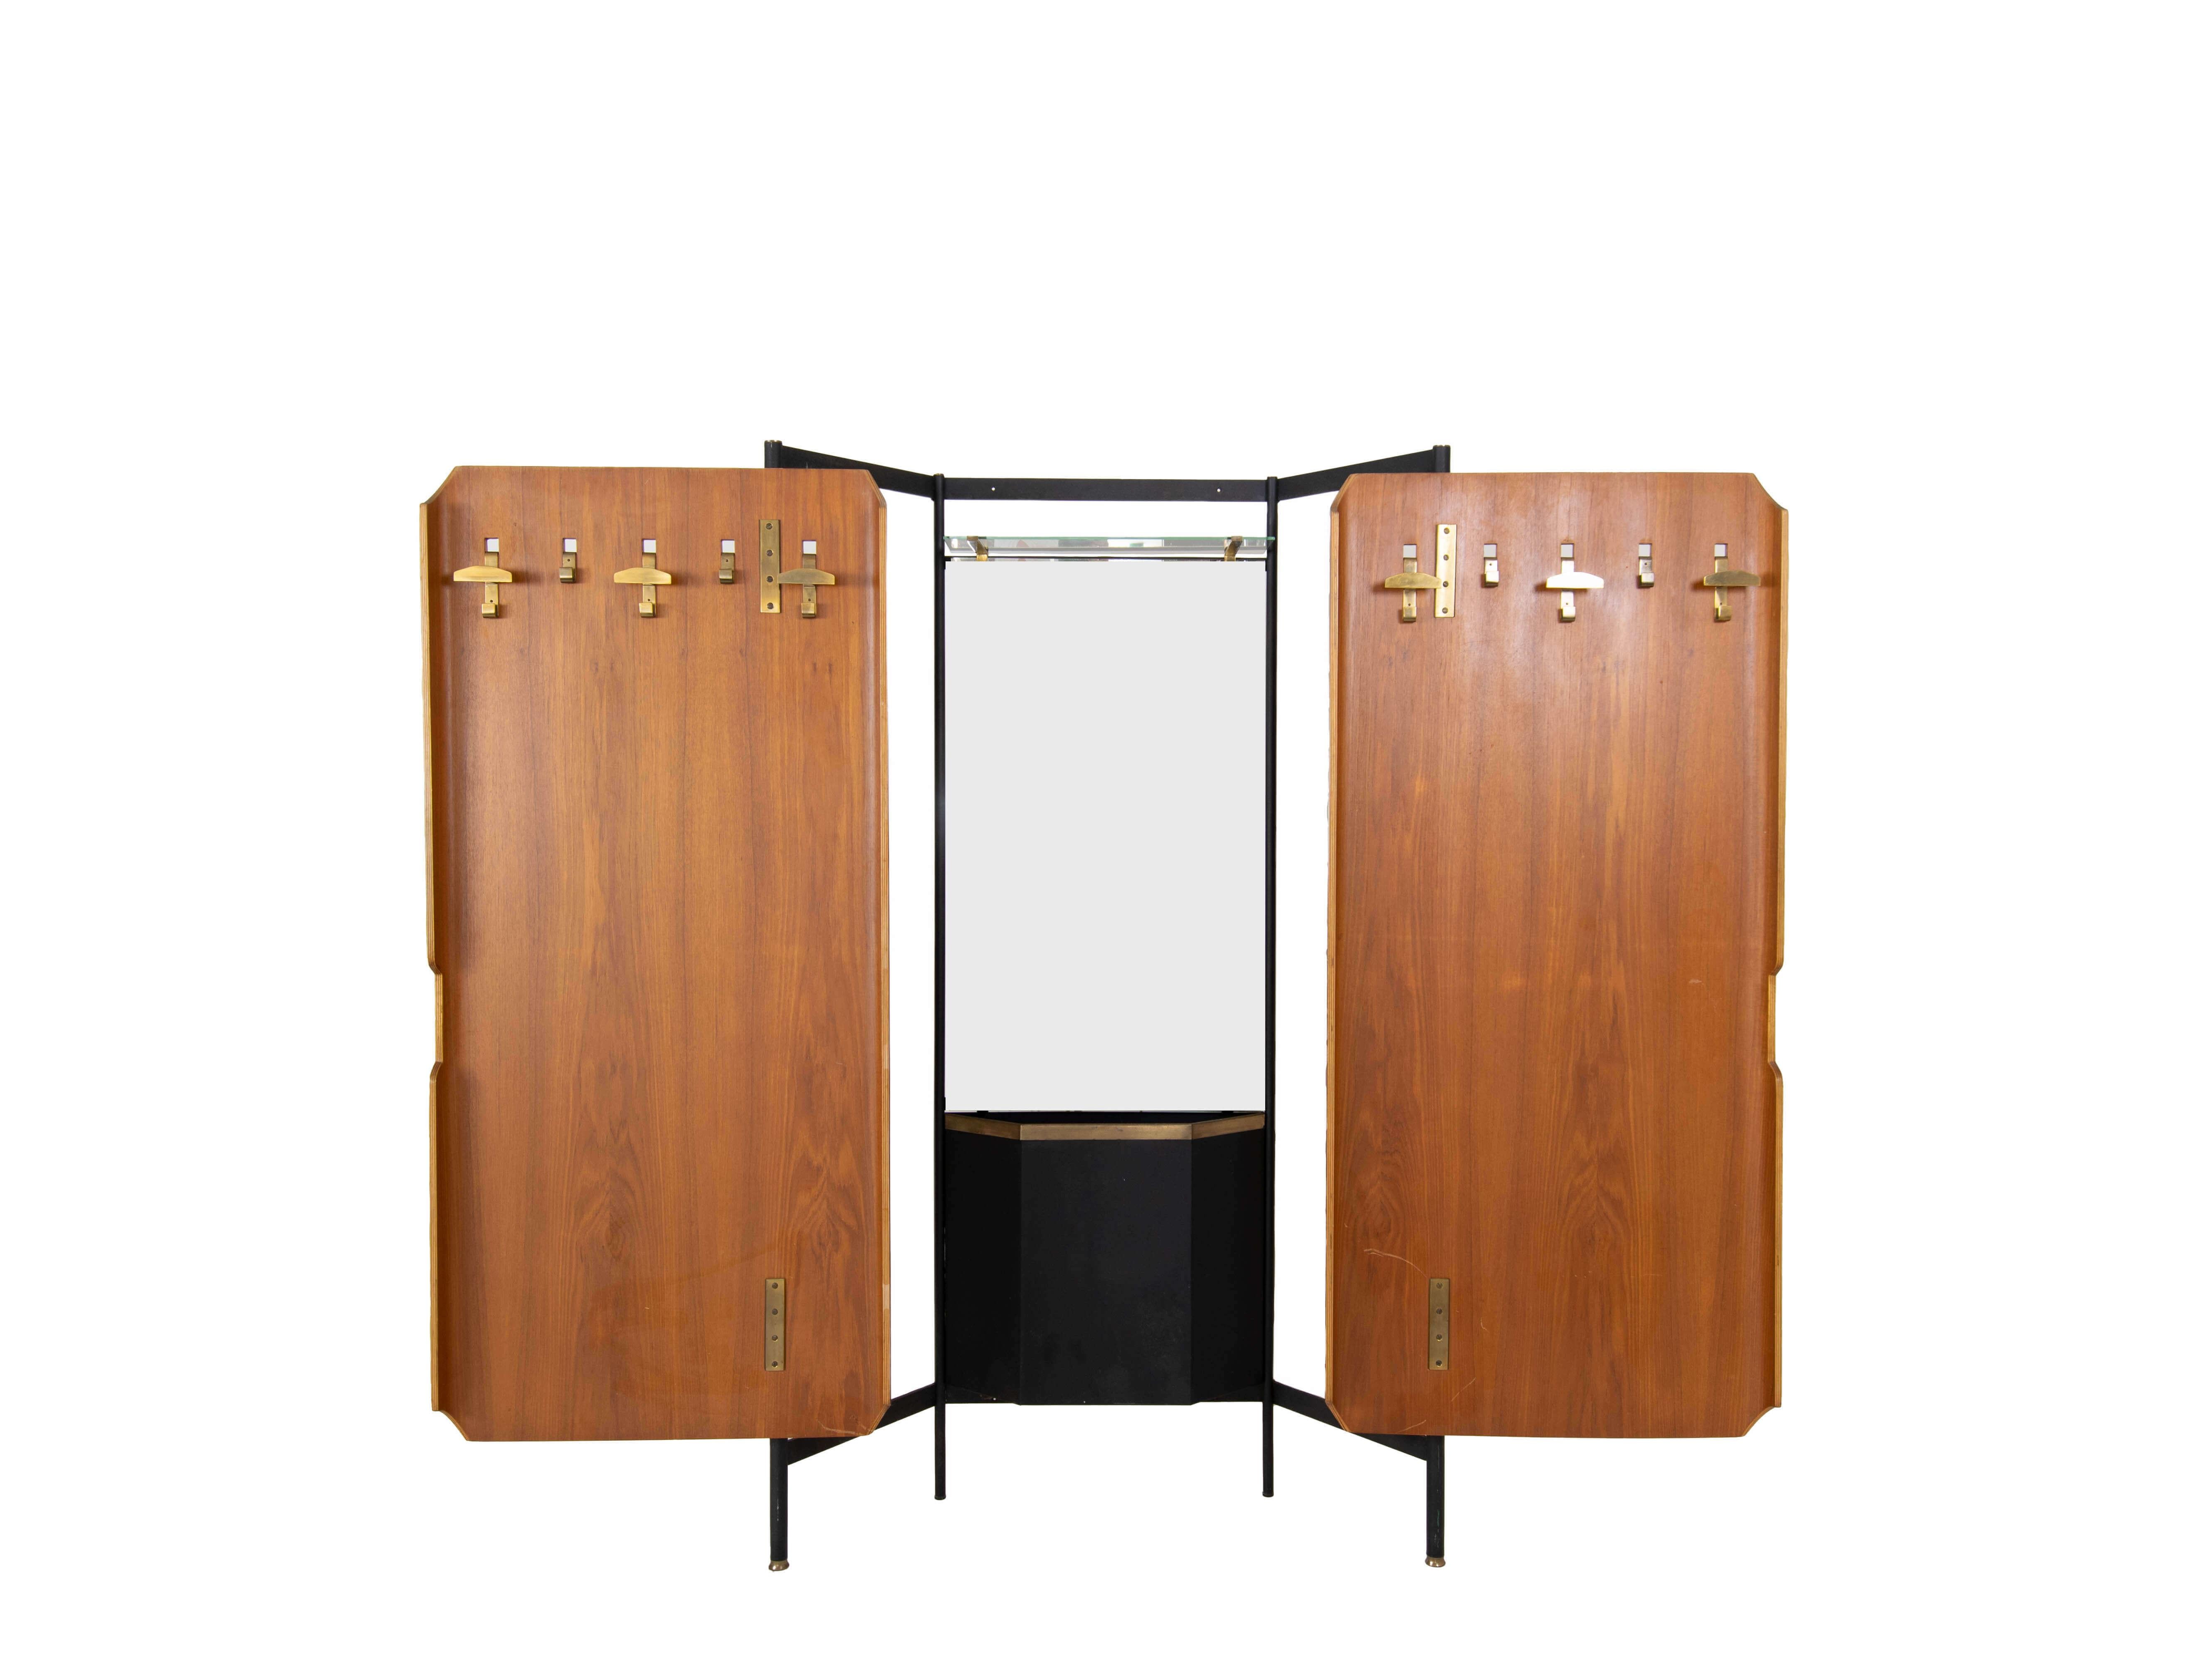 Rare Italian Modern Eugenia Alberti & Rinaldi Scaioli coat rack or coat cabinet. This unique piece was designed for for La Permanente Mobili di Cantù in Italy in the 1950s. It has a metal base with two doors on inside hangers. It has a large mirror